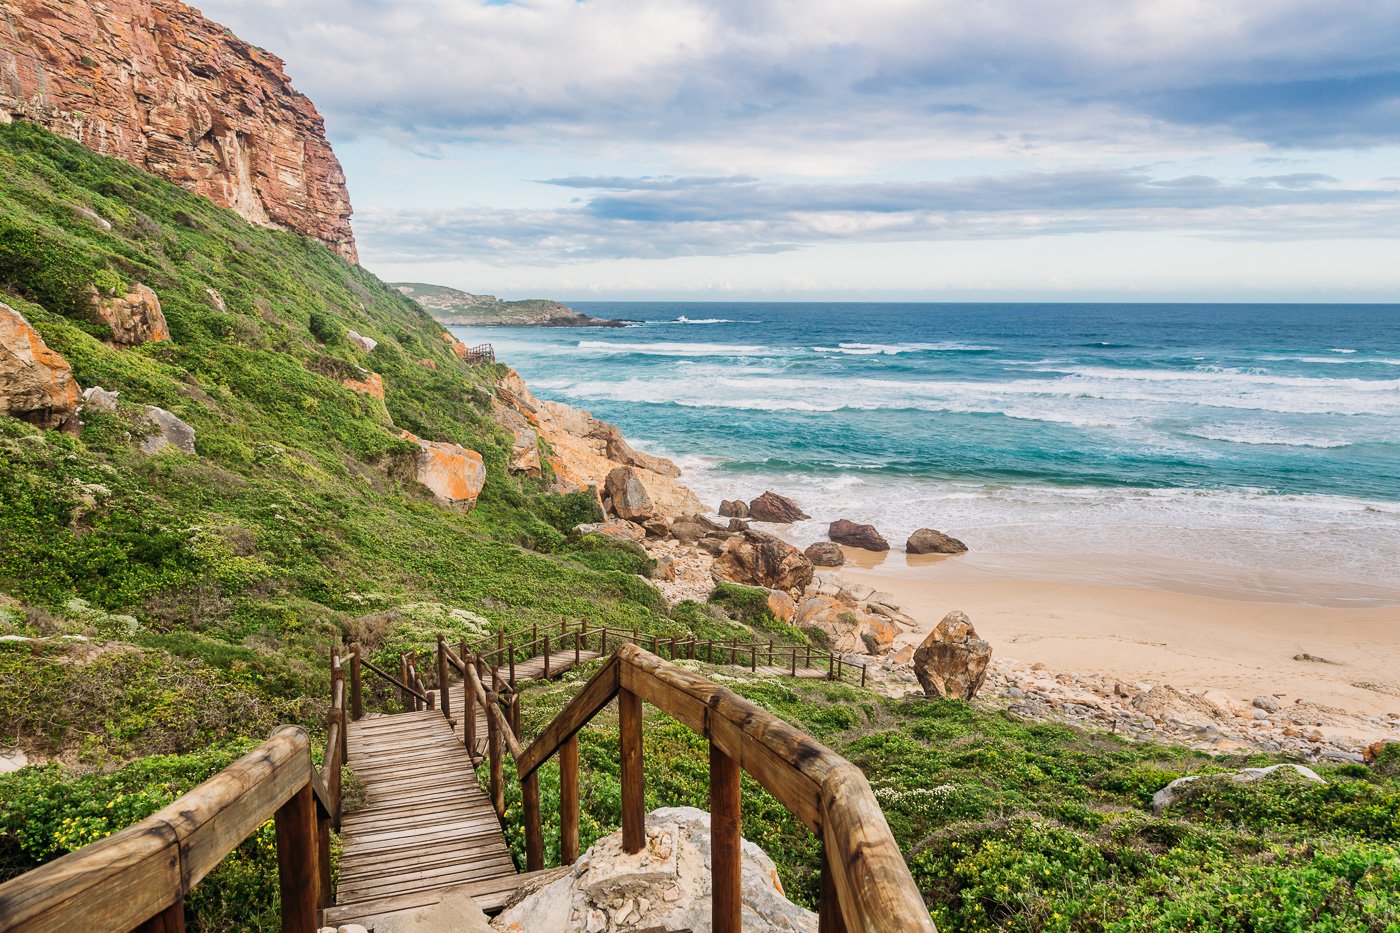 Robberg Nature Reserve, Plettenberg Bay, South Africa